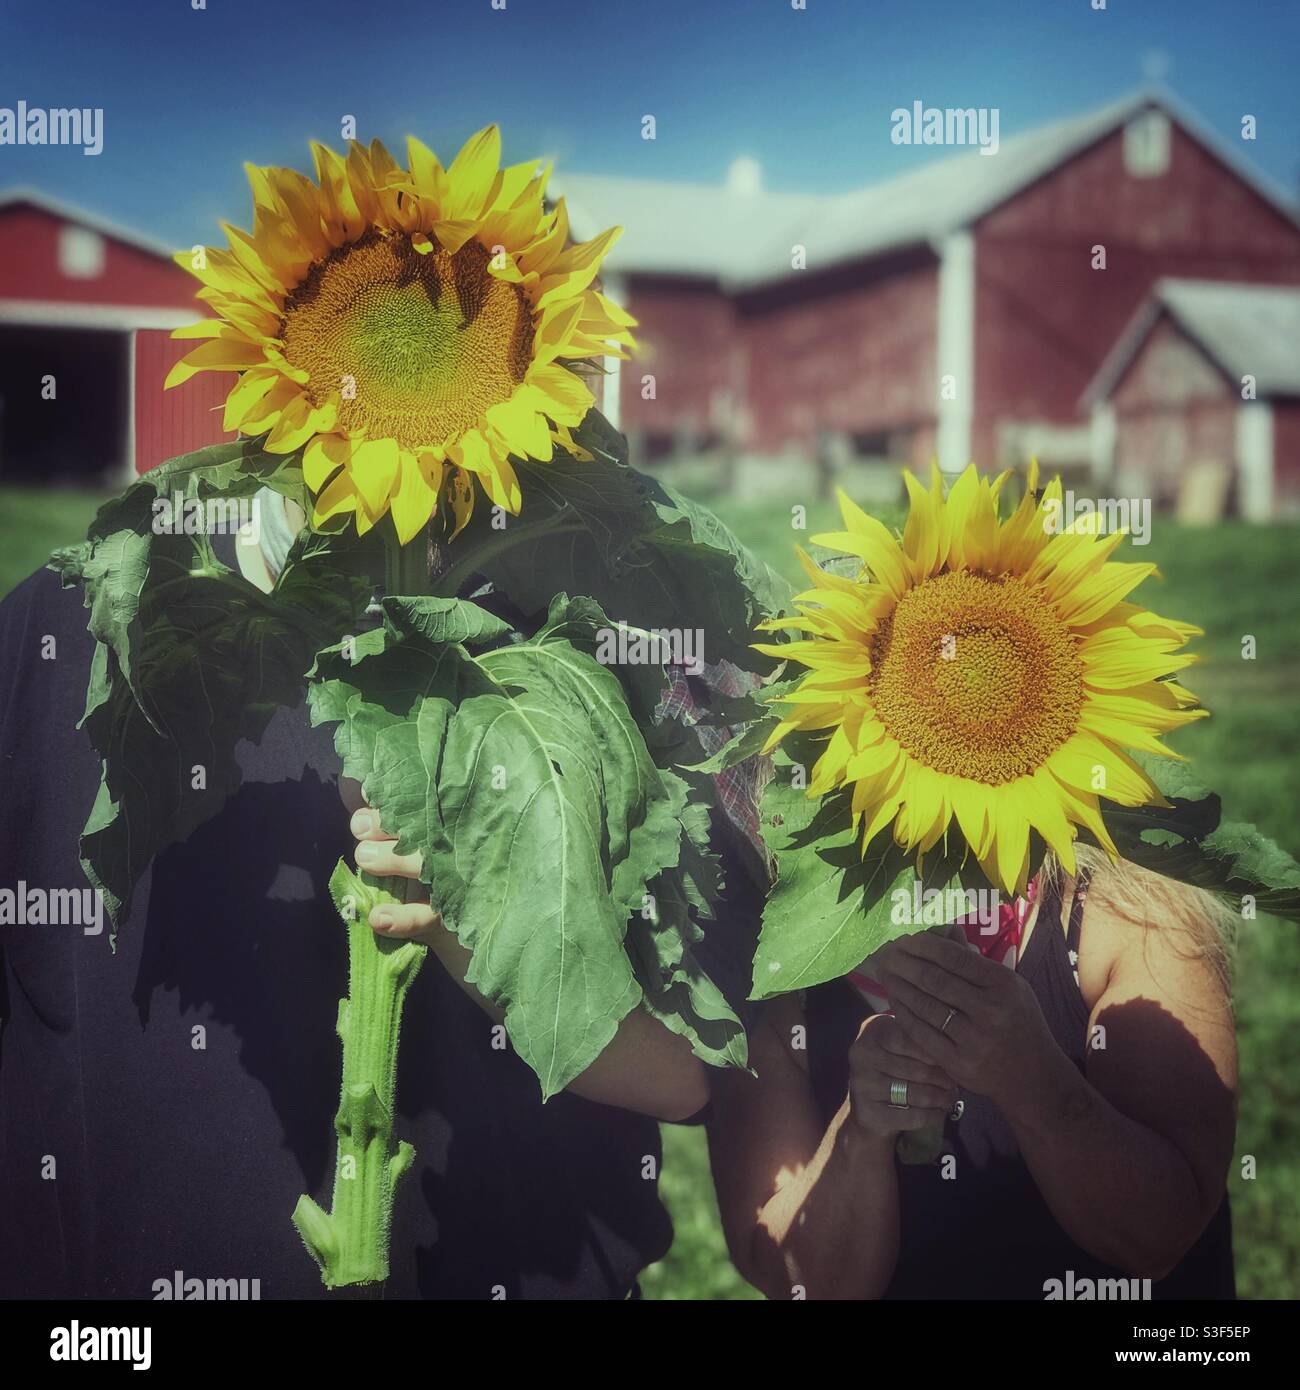 Couple holding large sunflowers in front of their faces Stock Photo